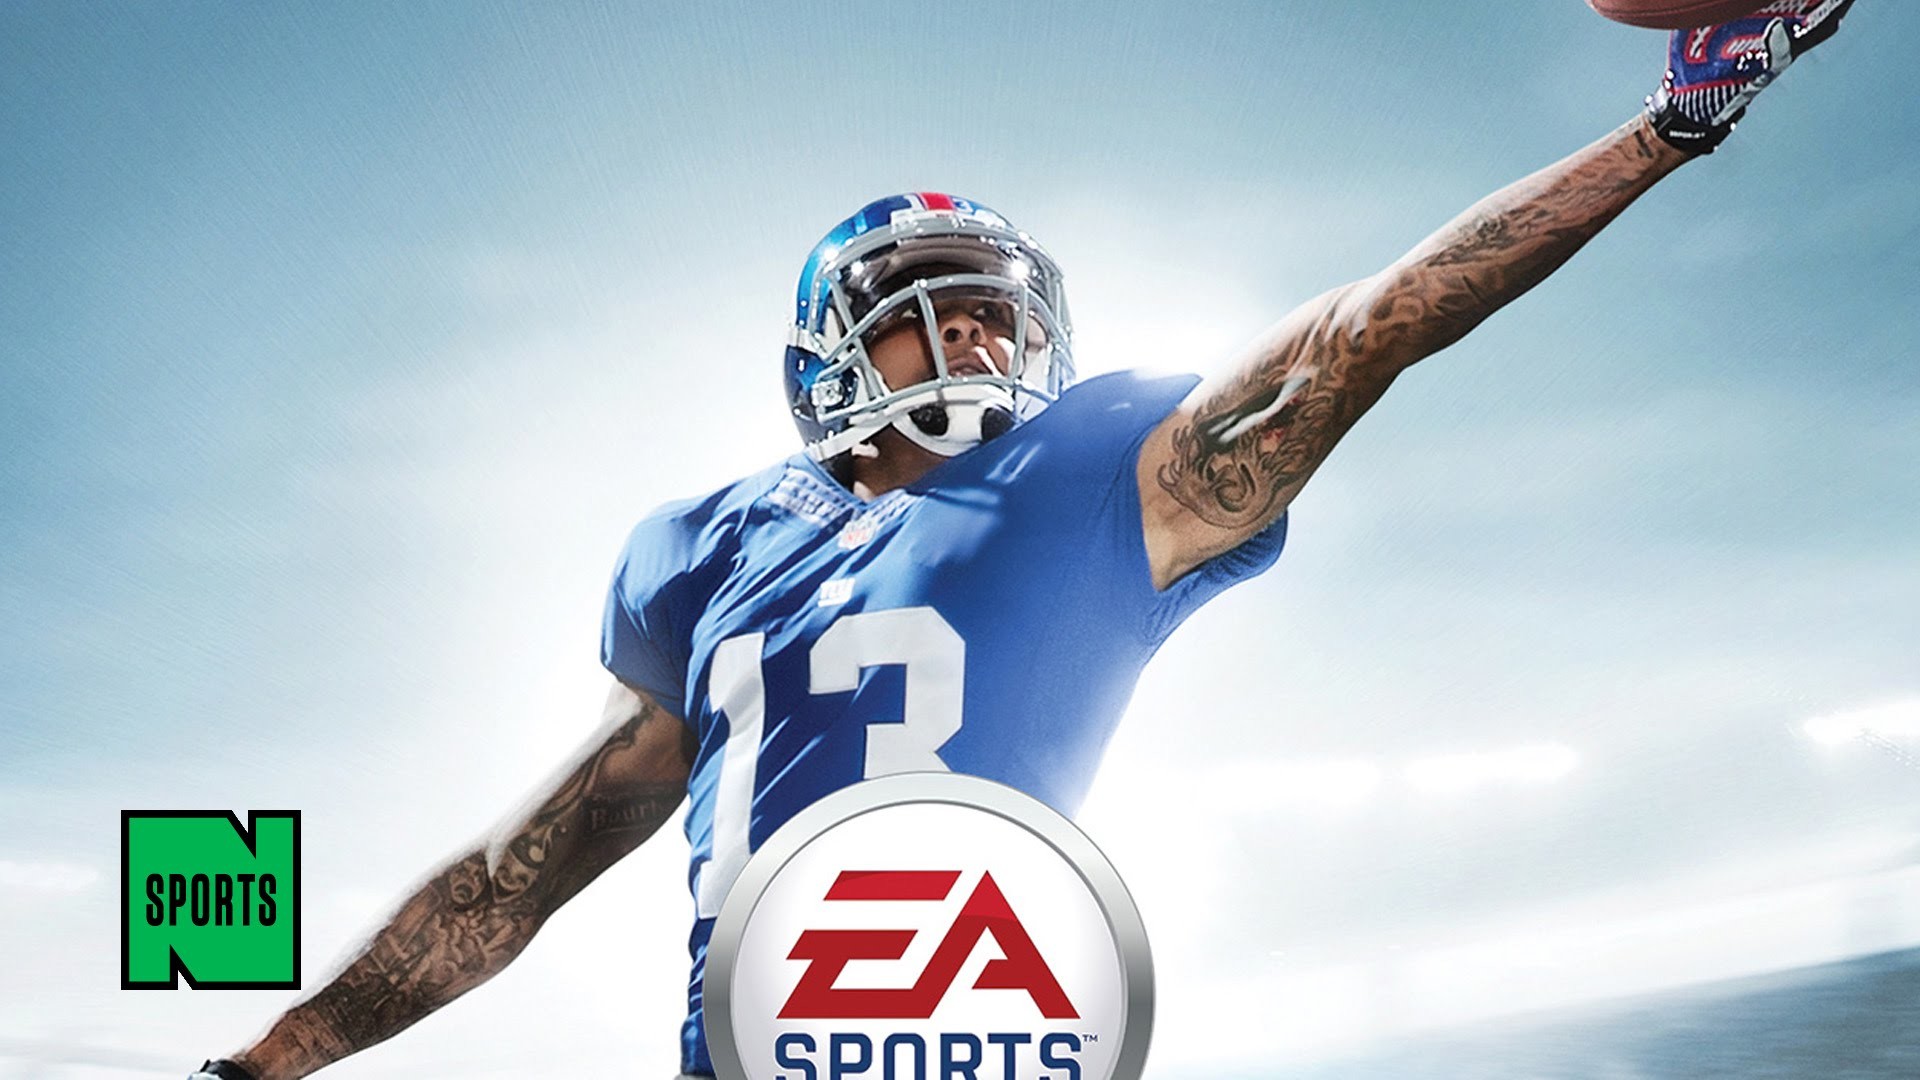 Odell Beckham Jr. on Madden 16, His Breakout Rookie Year, and The Catch – YouTube